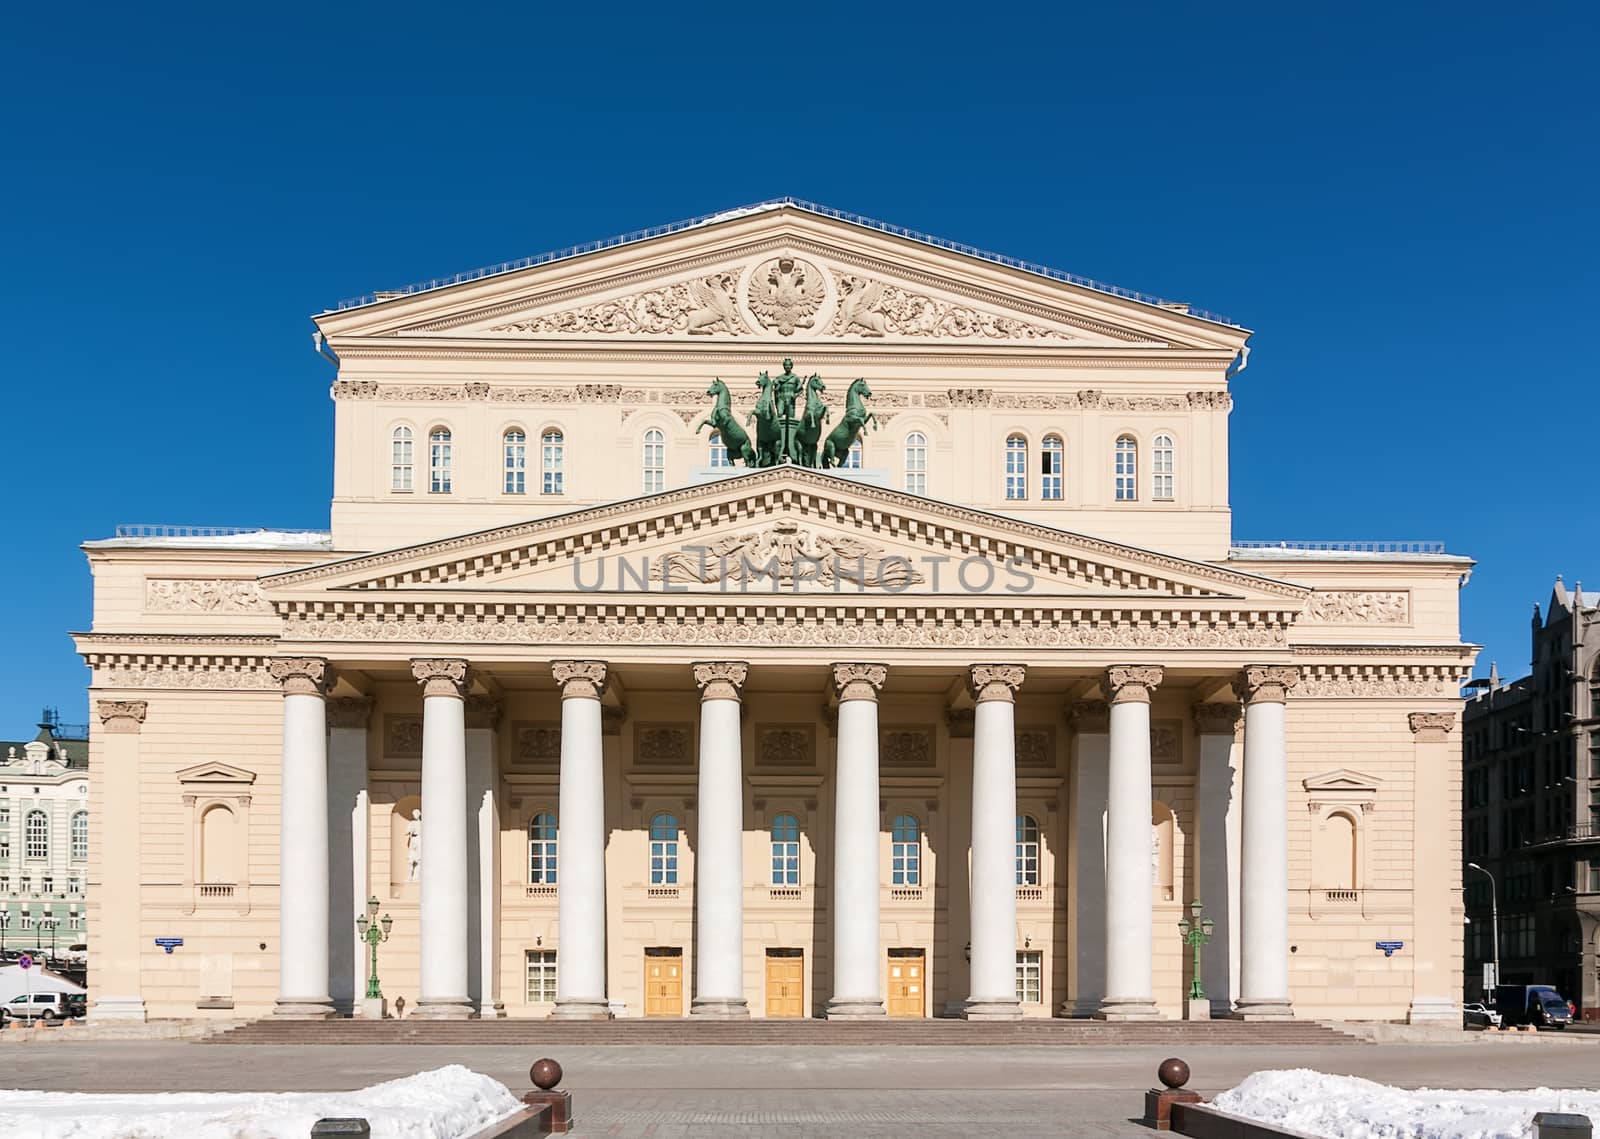 View of the Bolshoi Theatre is the most famous Opera House in Russia